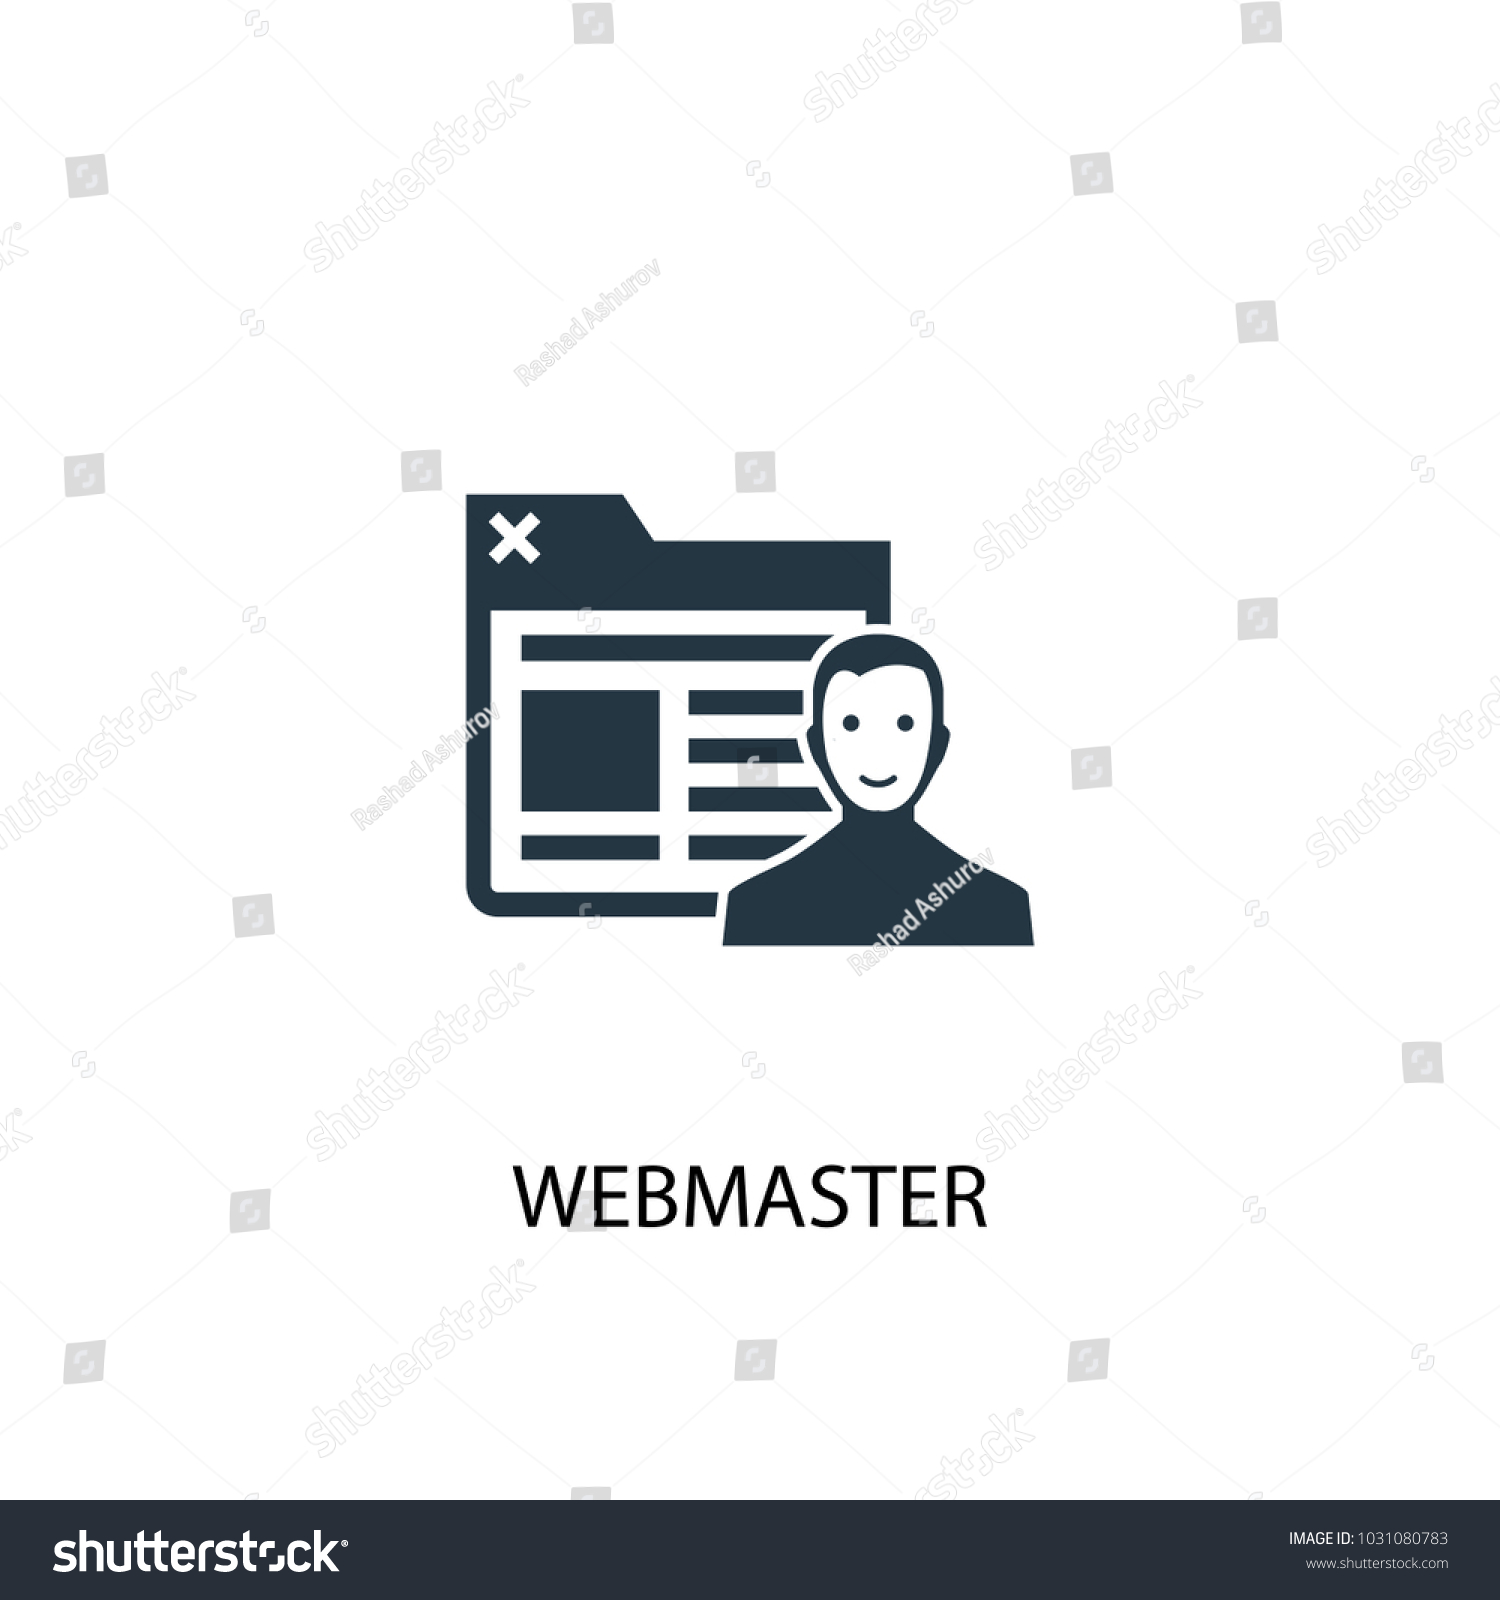 Webmaster Icon Simple Element Illustration Webmaster Stock Vector 